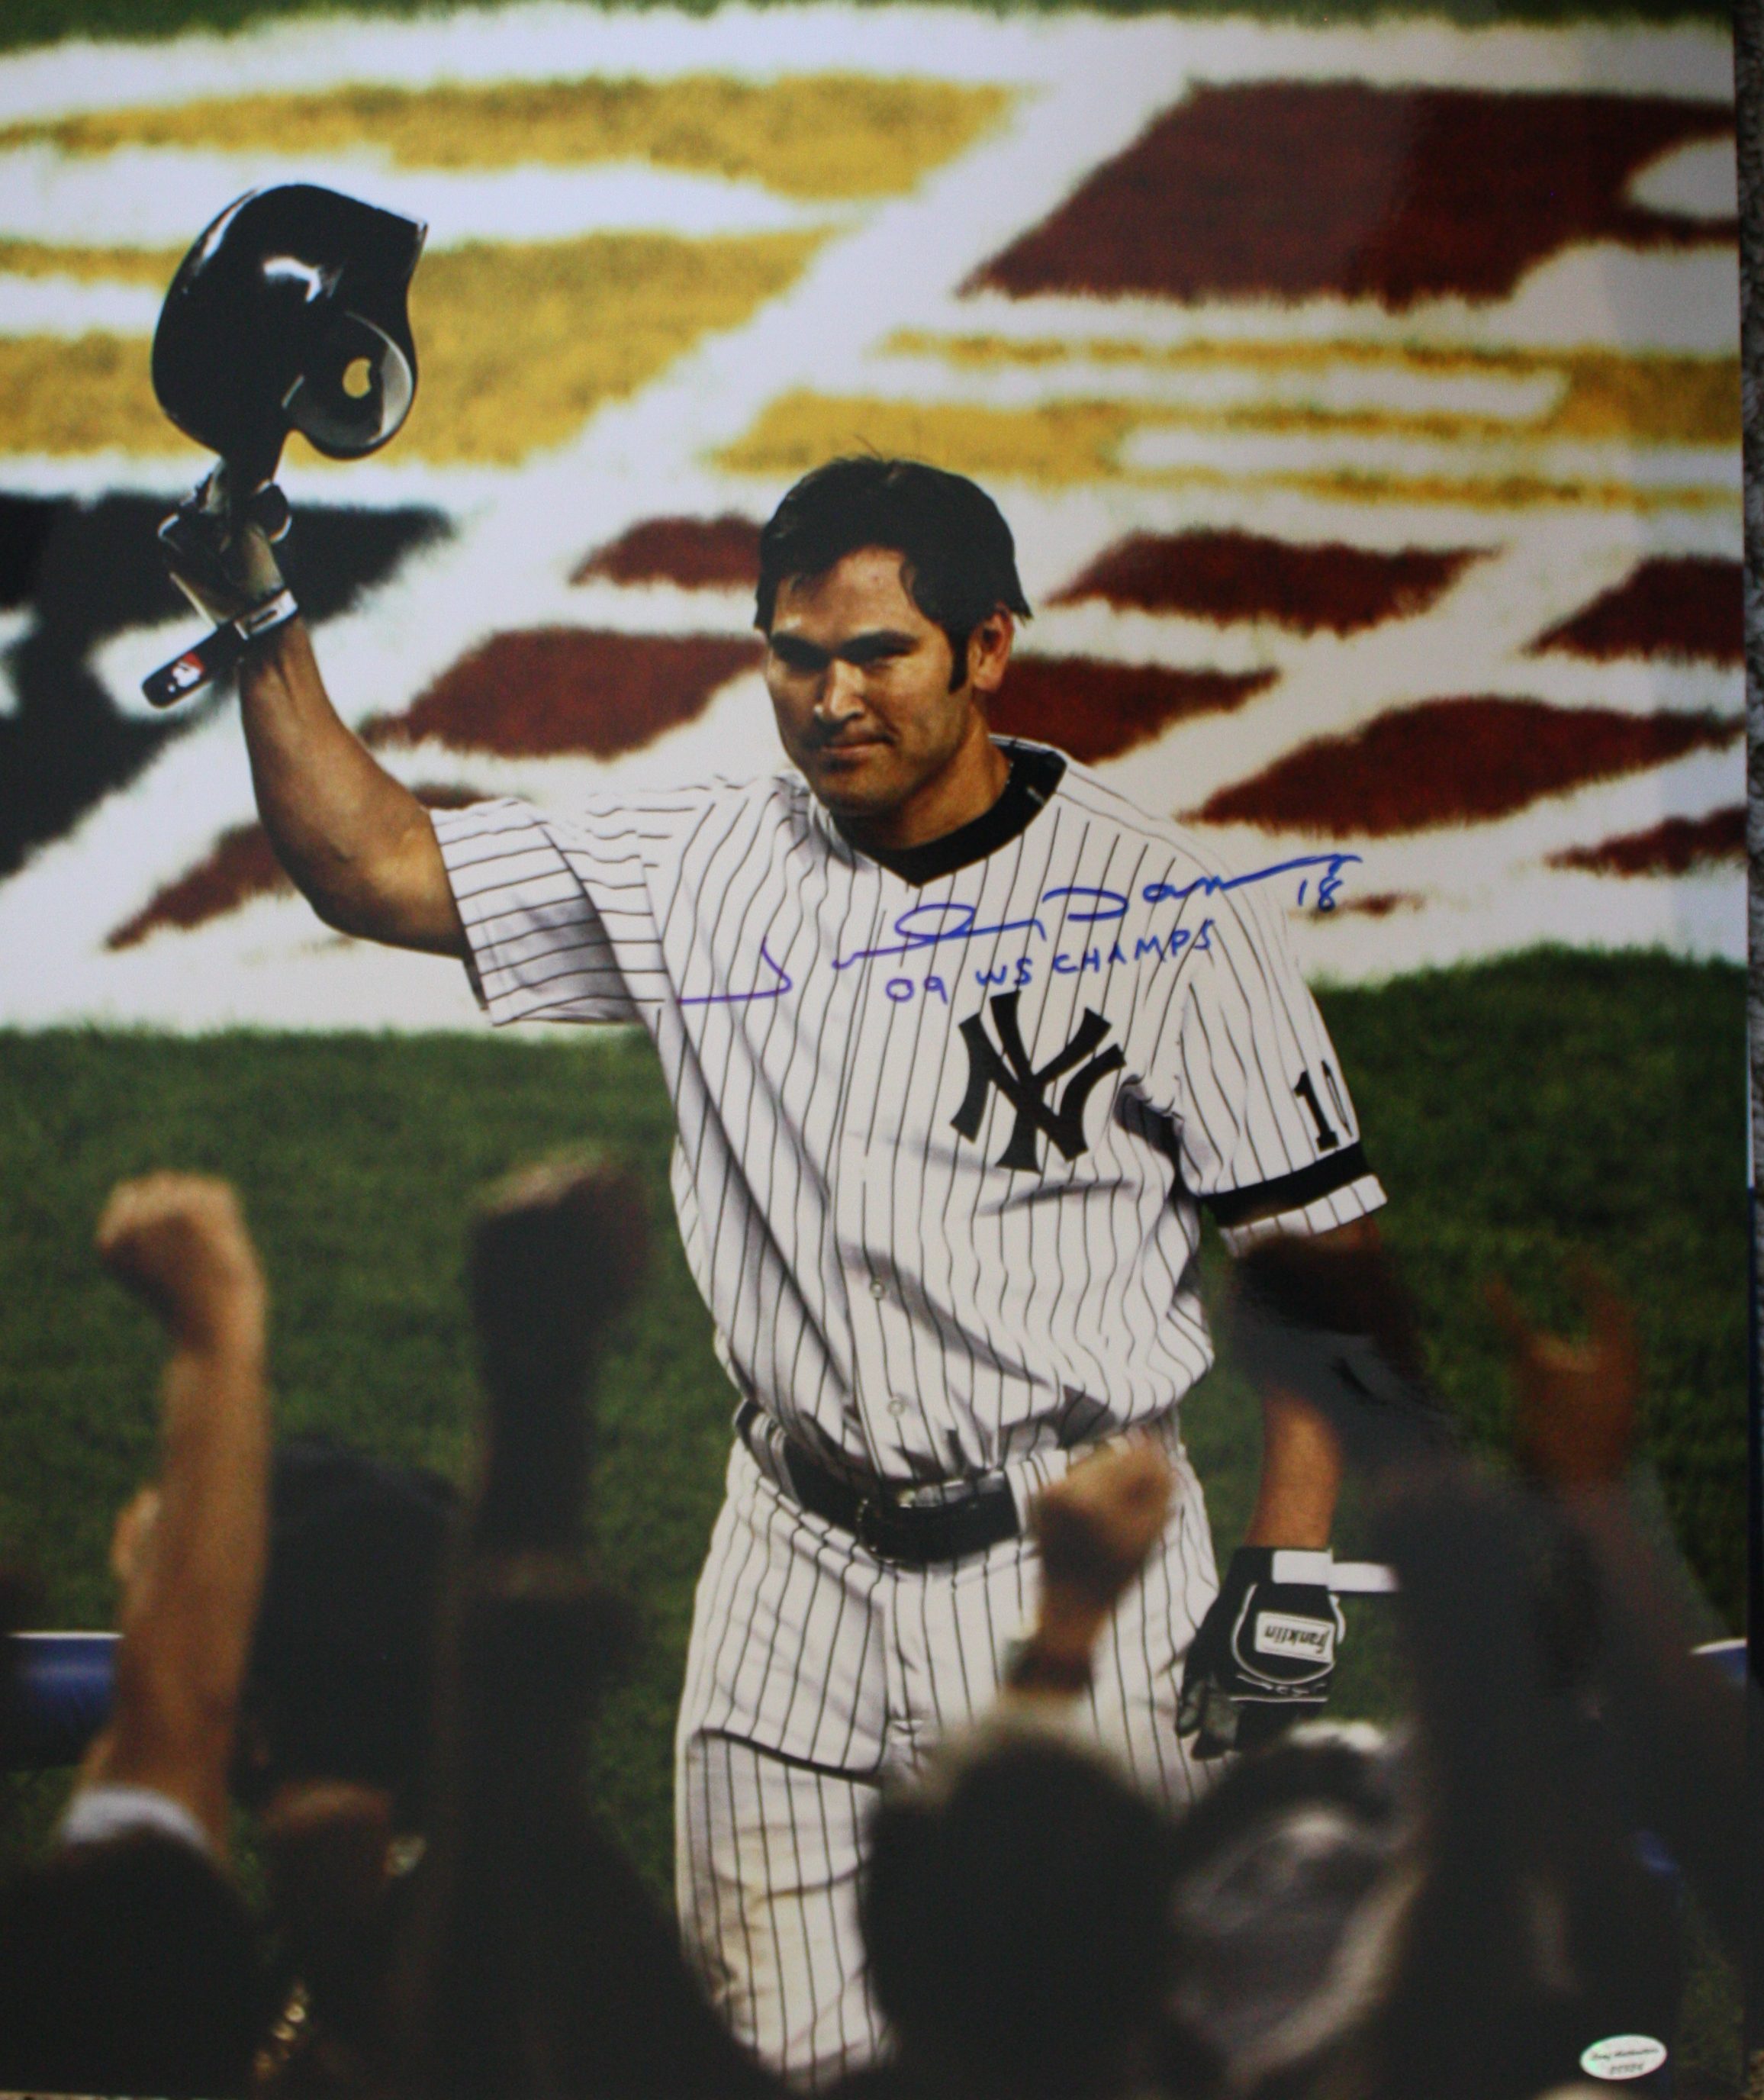 Former Red Sox, Yankees Player Johnny Damon to Sign Autographs at